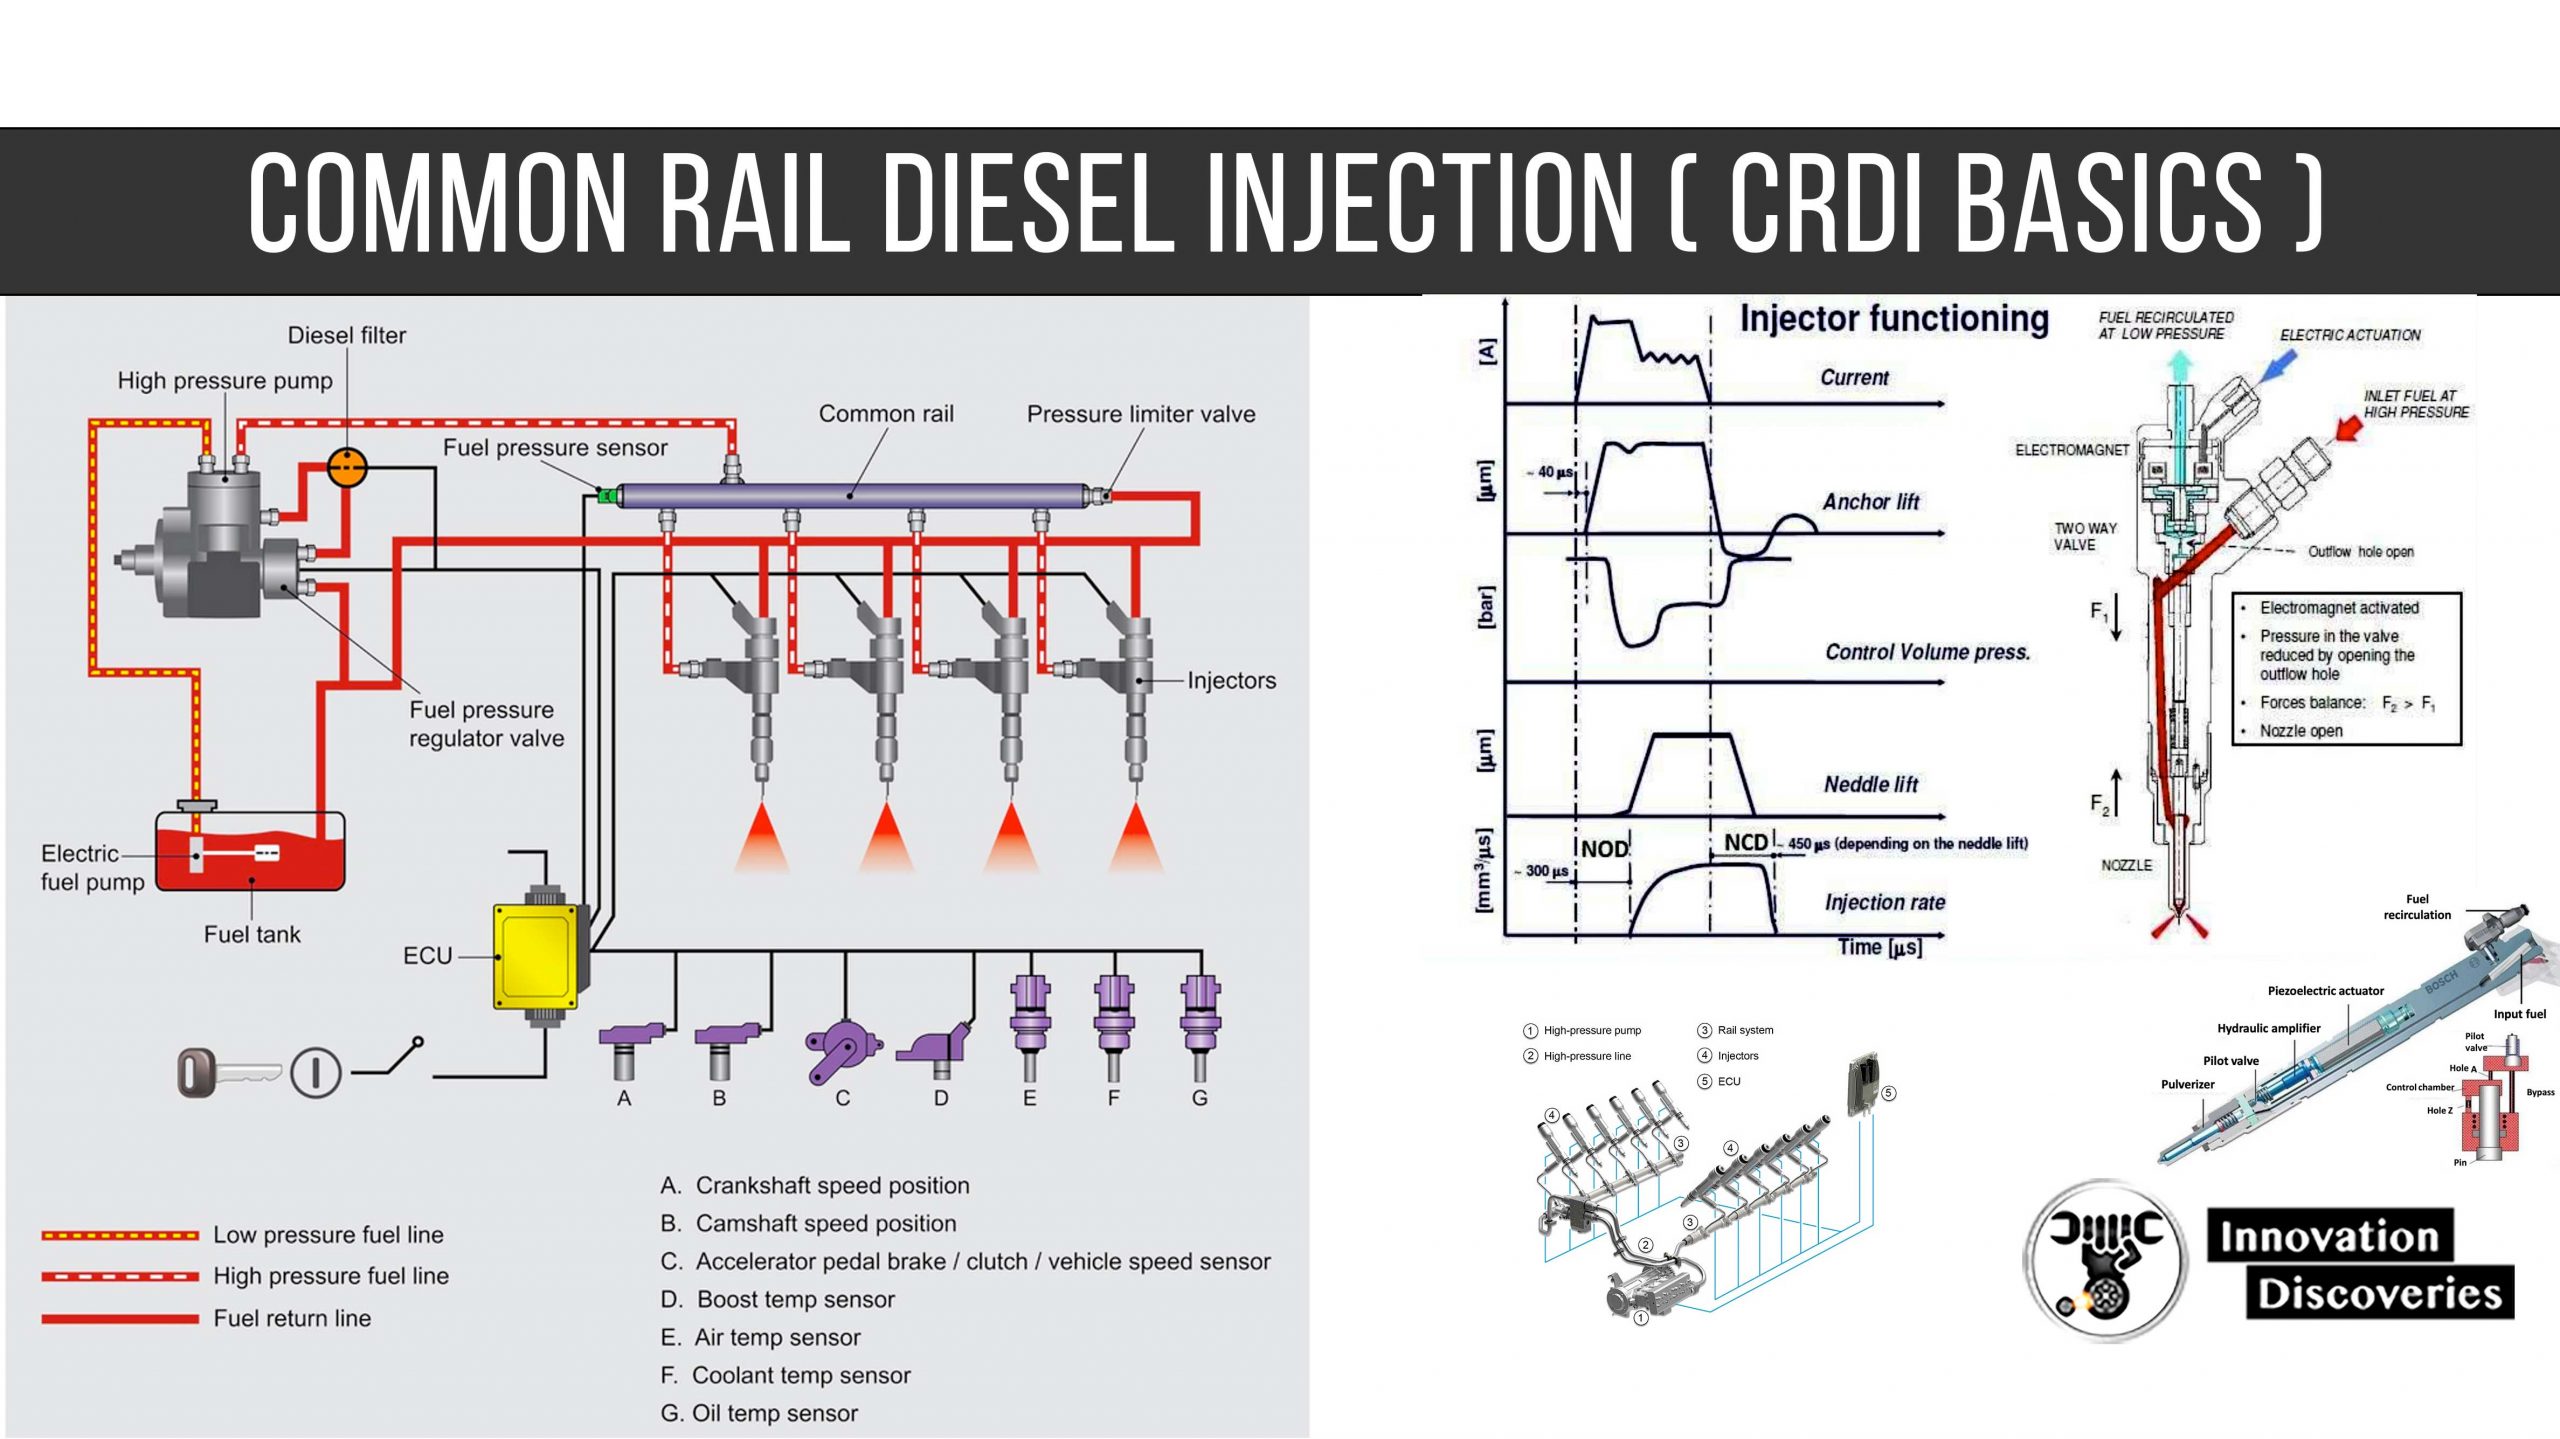 Schematics of a common rail diesel injector showing the notation used